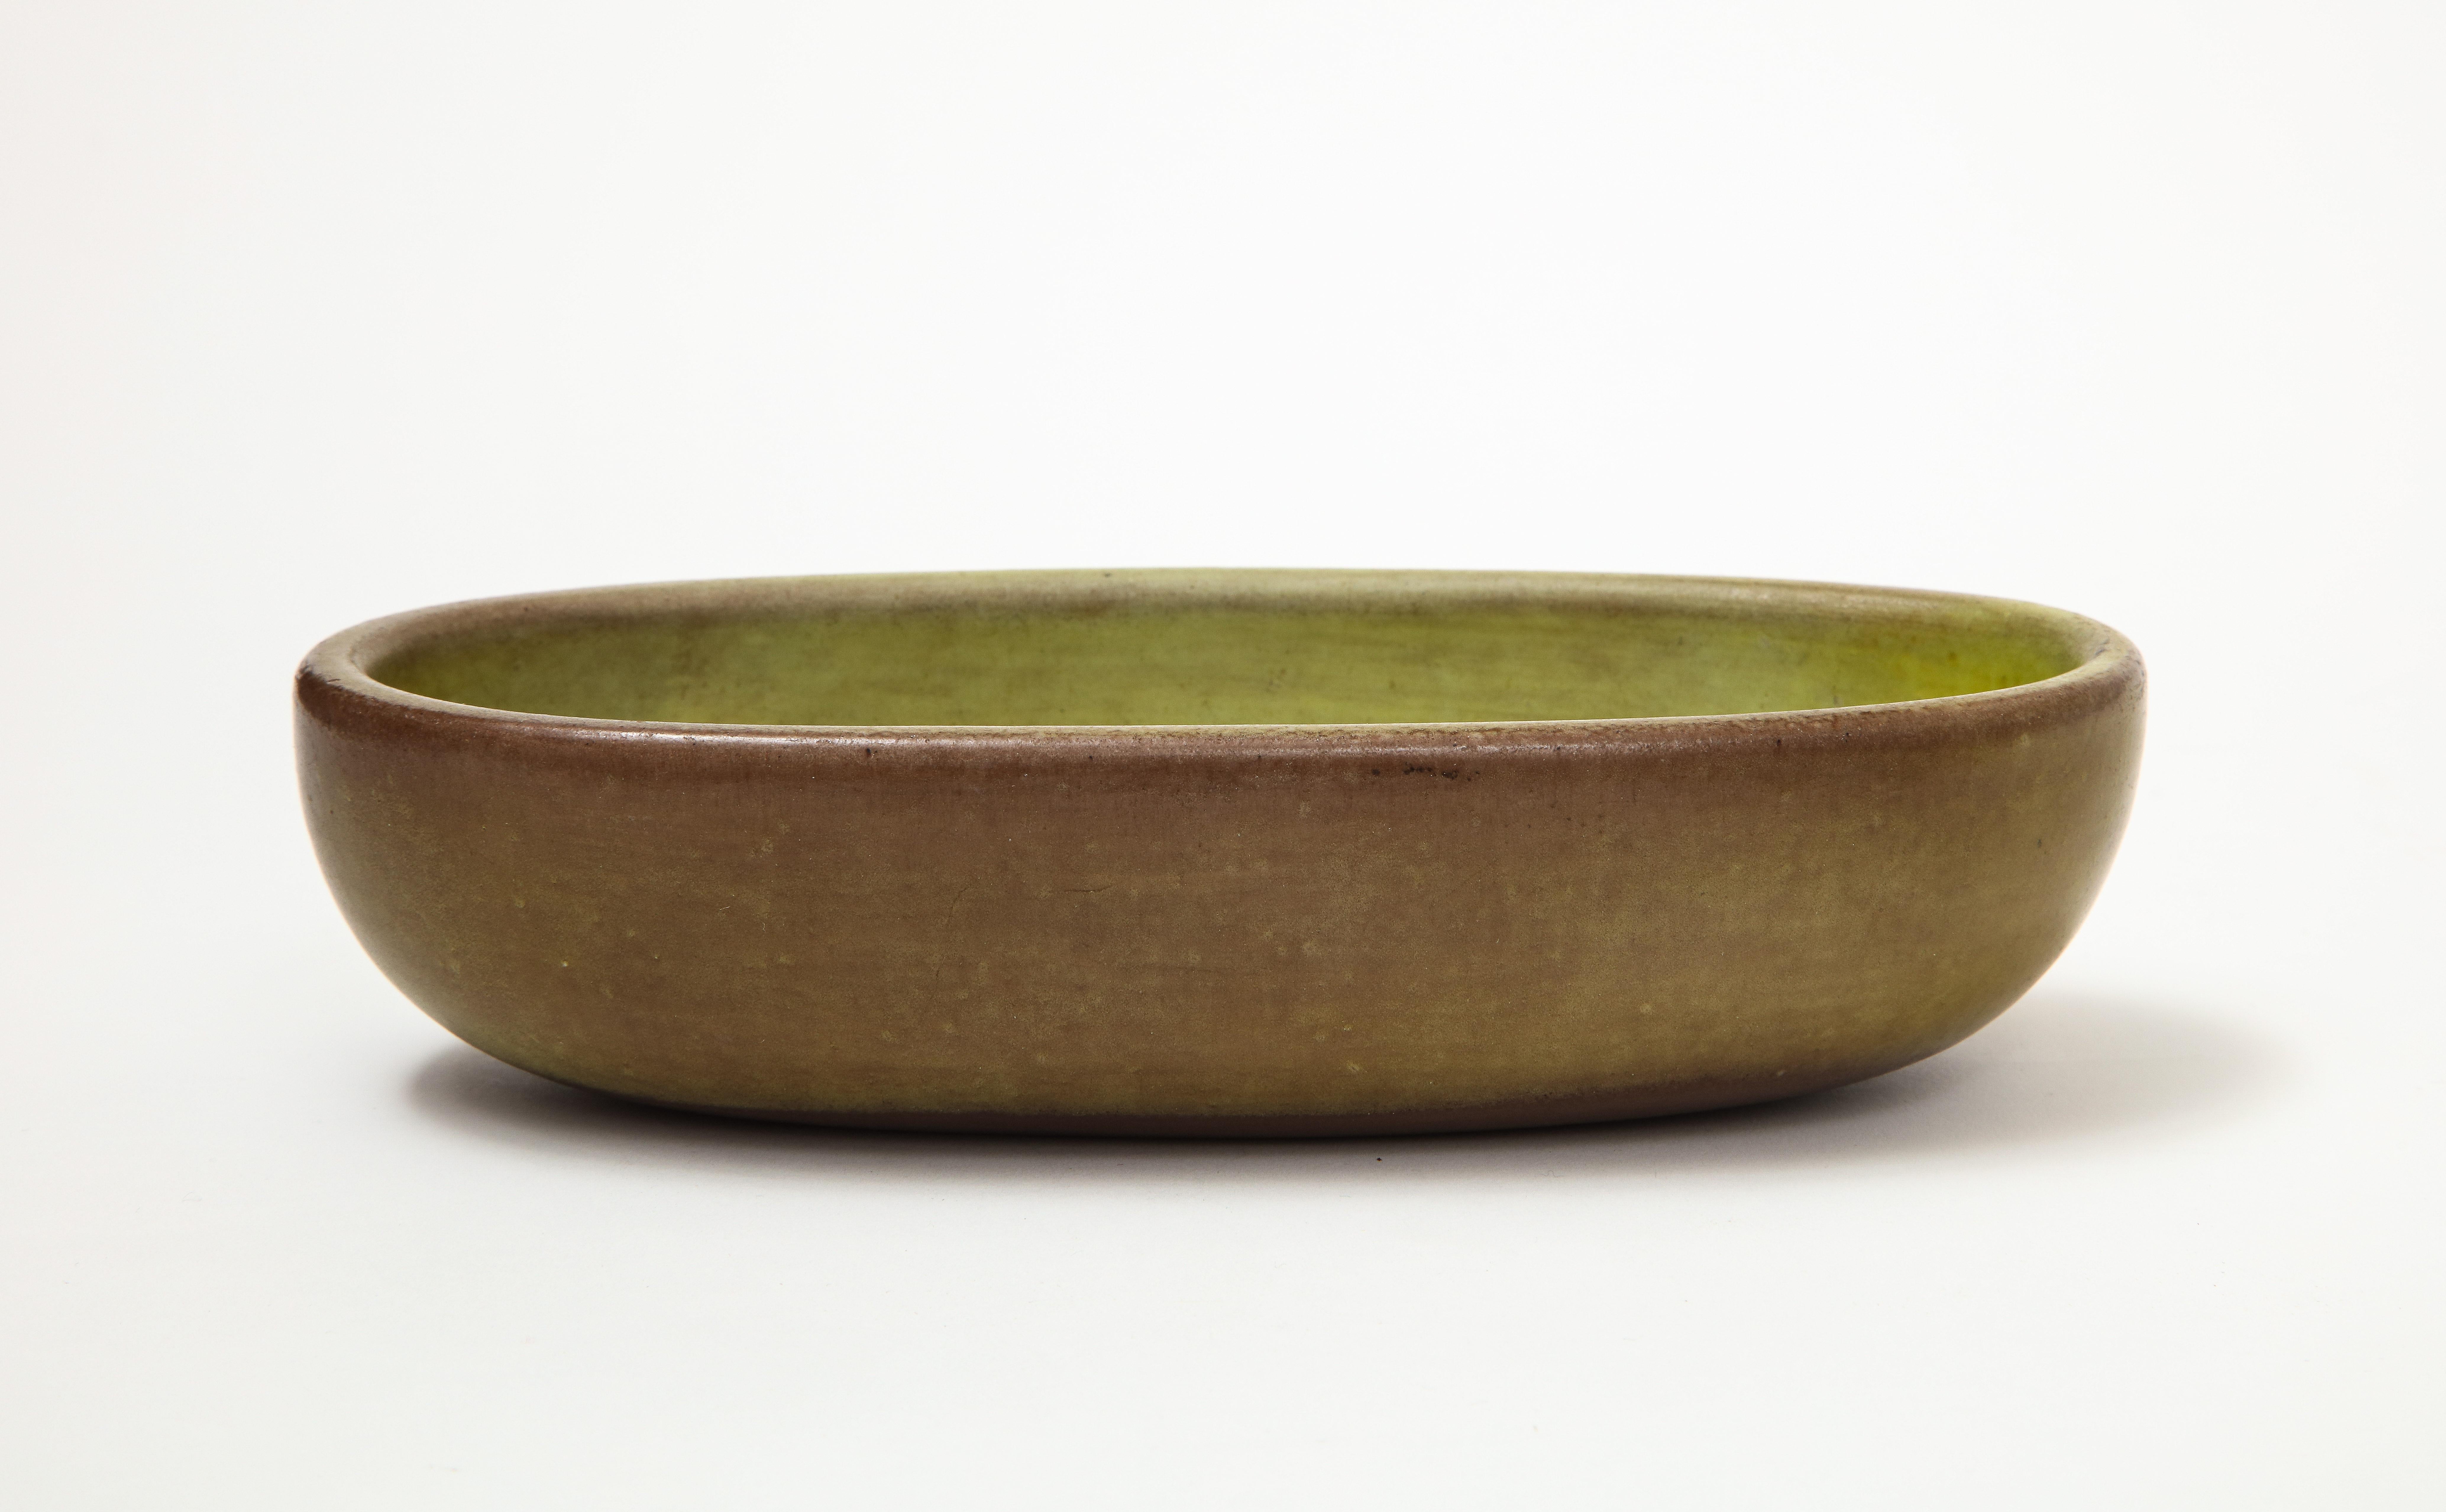 Glazed Brown and Green Oval Ceramic Tray by Dani and Jacques Ruelland, France, c. 1950s